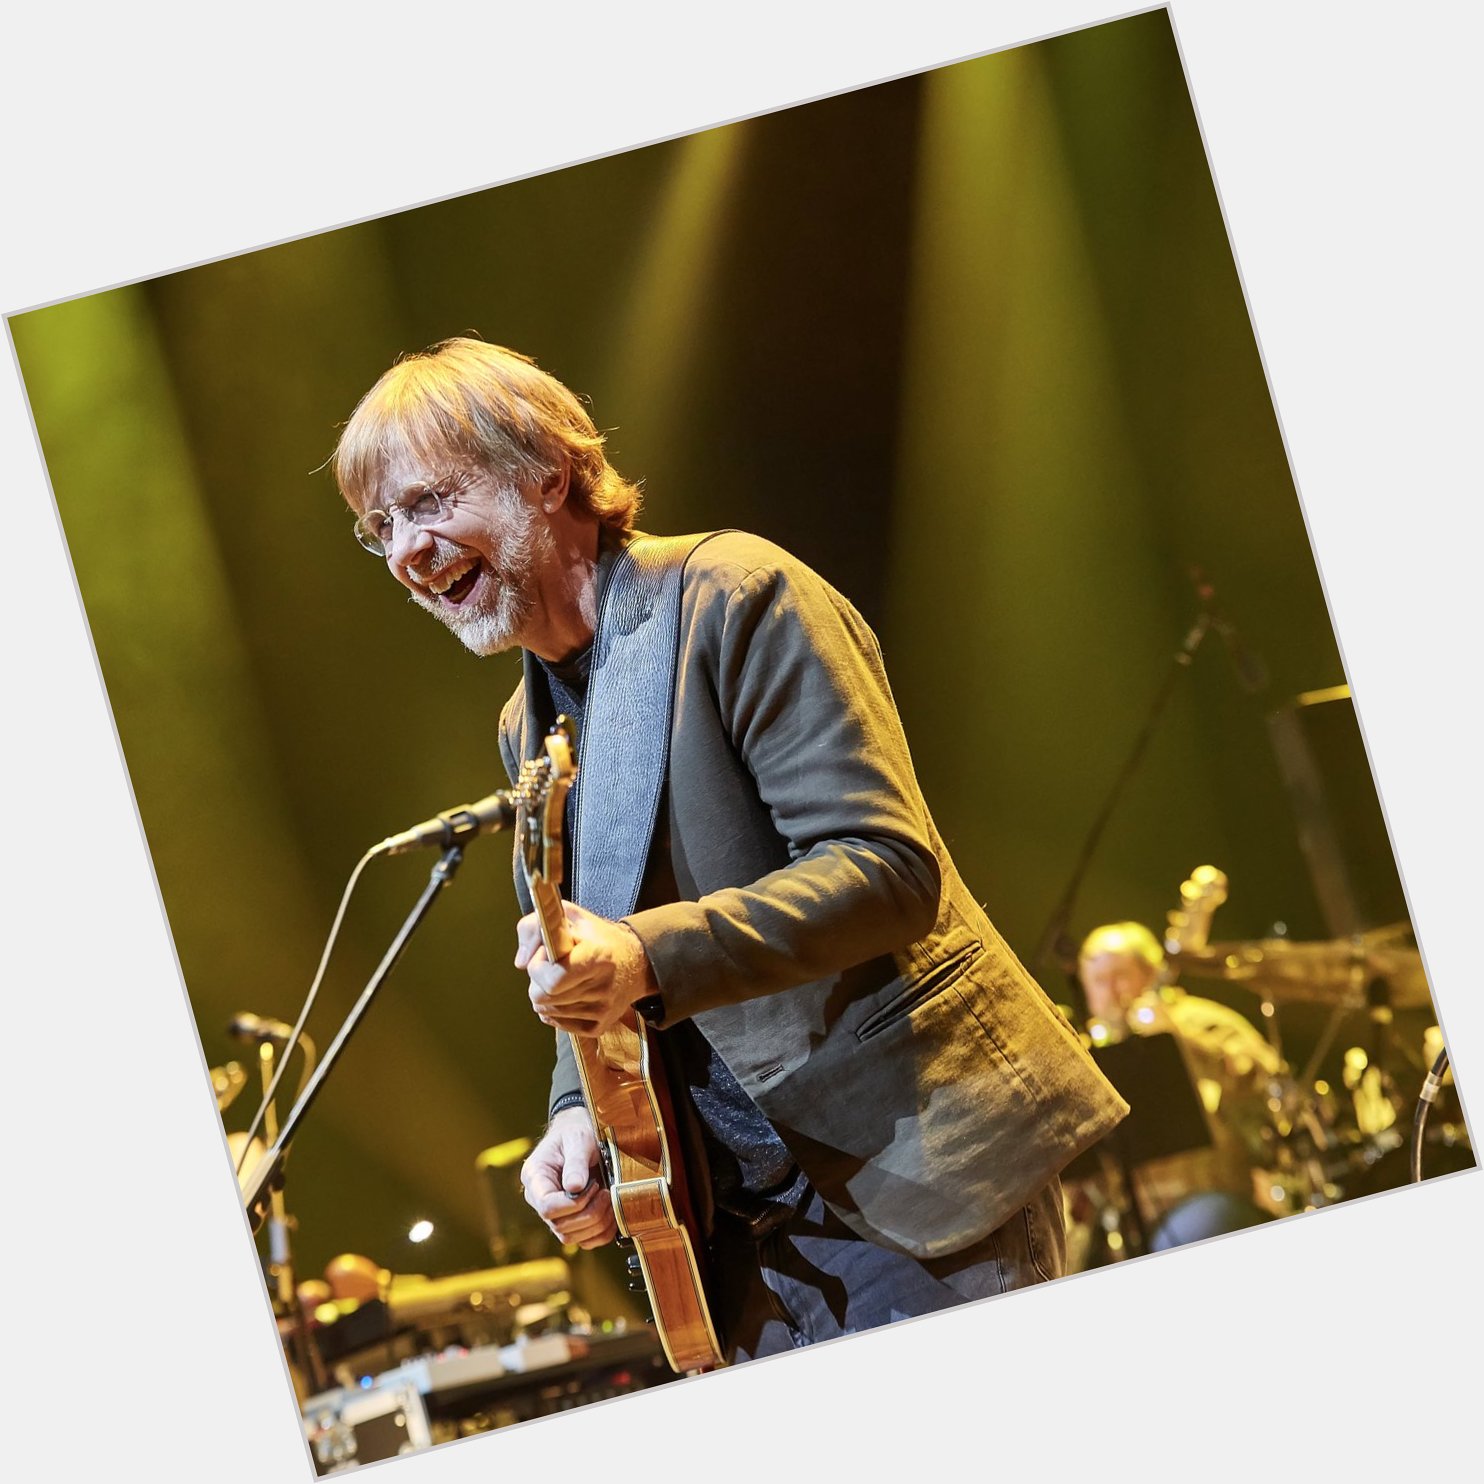 Join us in wishing a very happy birthday to Trey Anastasio! What s your favorite Trey memory from the Beacon? 